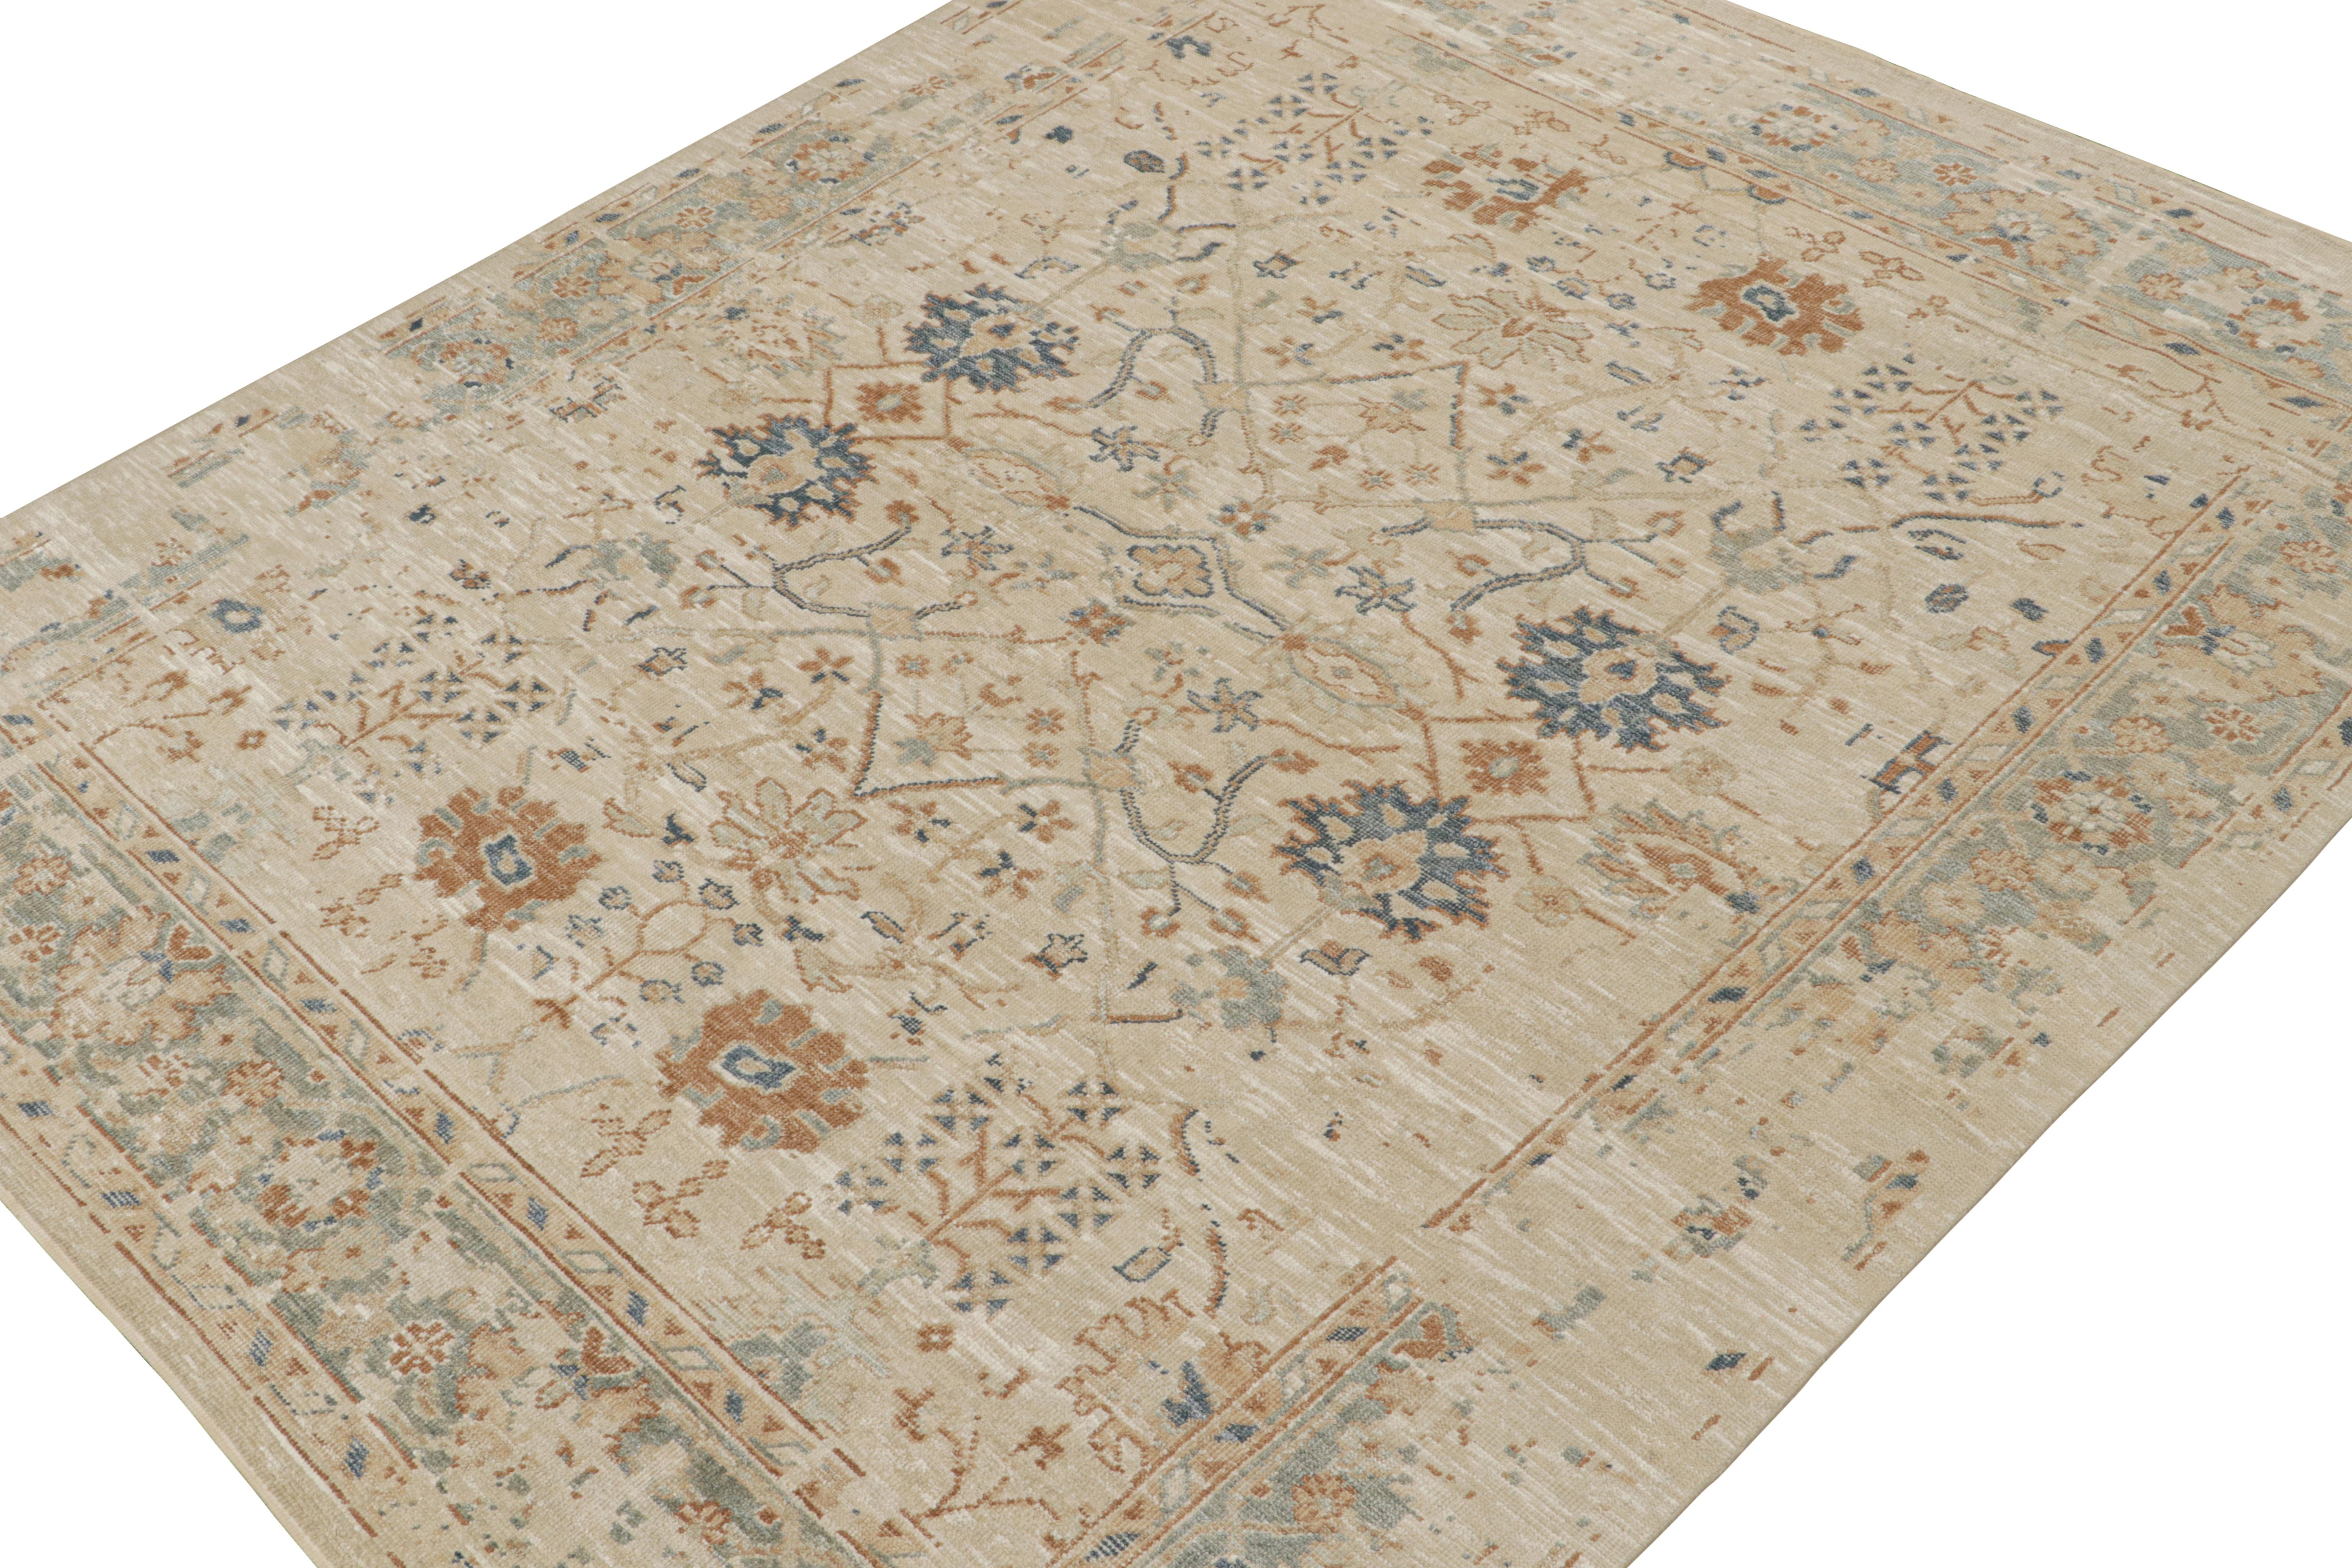 This 8x10 rug is inspired by antique Oushak rugs—from a bold new Modern Classics Collection by Rug & Kilim. Hand-knotted in silk, it enjoys taupe and beige-brown undertones with tribal motifs and floral patterns in rust tones and navy blue. 

On the